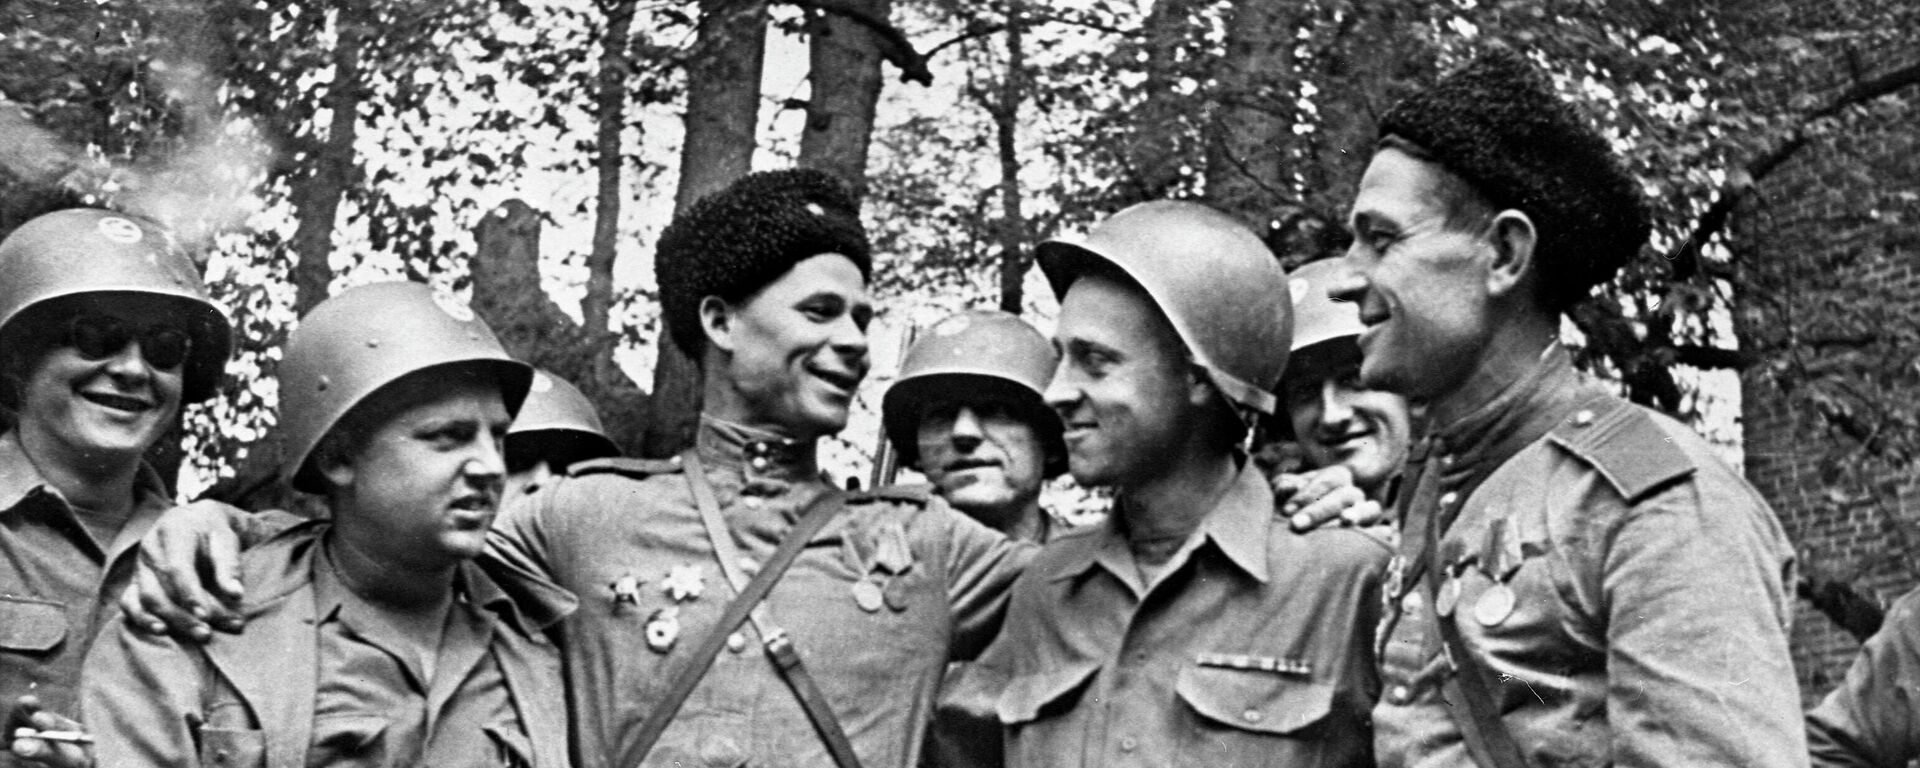 Meeting of American and Soviet soldiers on April 25, 1945 near the city of Torgau. - Sputnik International, 1920, 25.04.2022